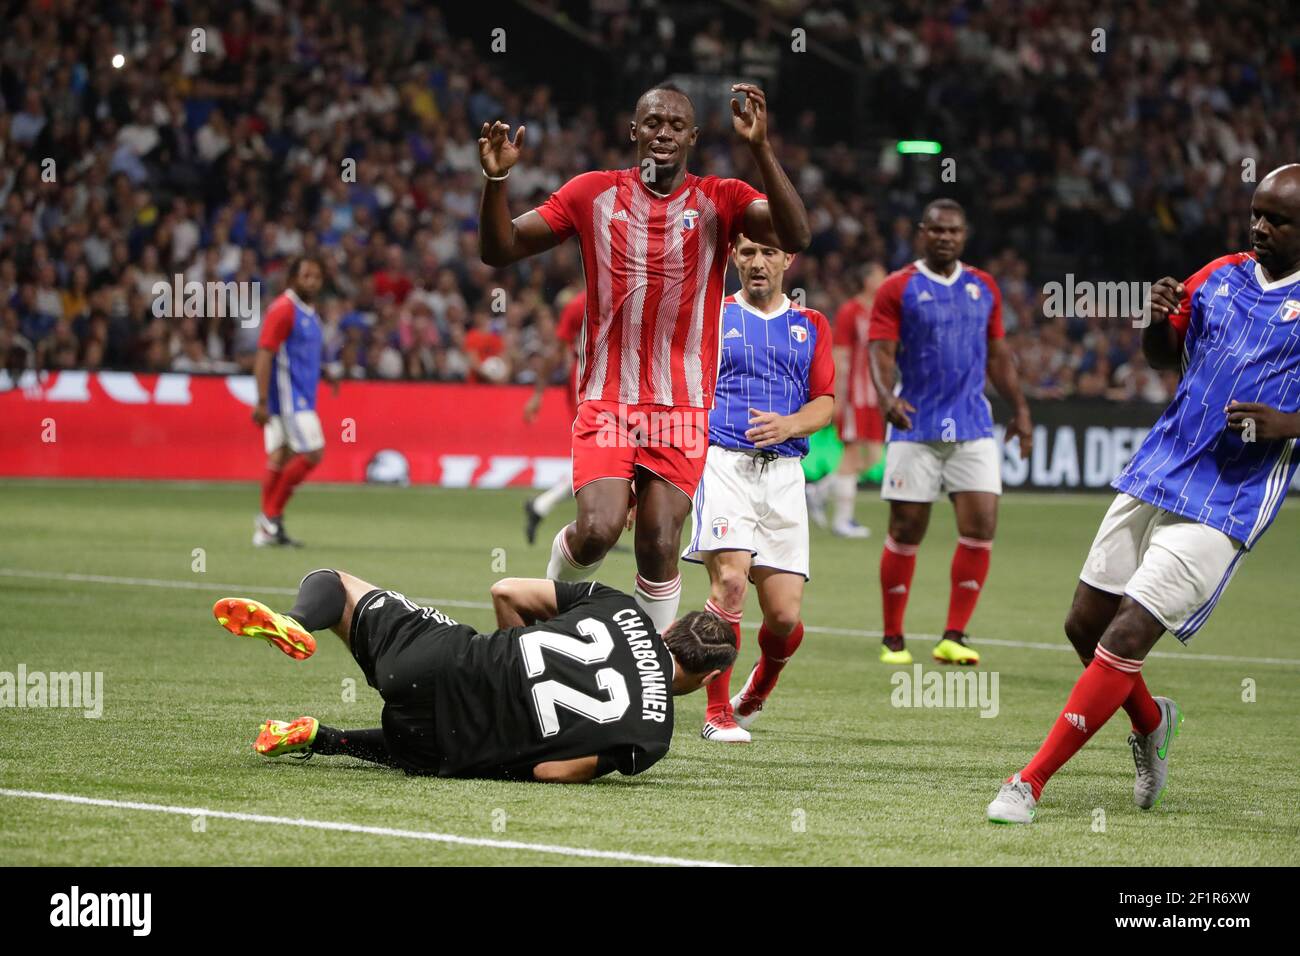 Usain Bolt (FIFA 98), Lionel Charbonnier (France 98), Bixente Lizarazu (France 98) during the 2018 Friendly Game football match between France 98 and FIFA 98 on June 12, 2018 at U Arena in Nanterre near Paris, France - Photo Stephane Allaman / DPPI Stock Photo